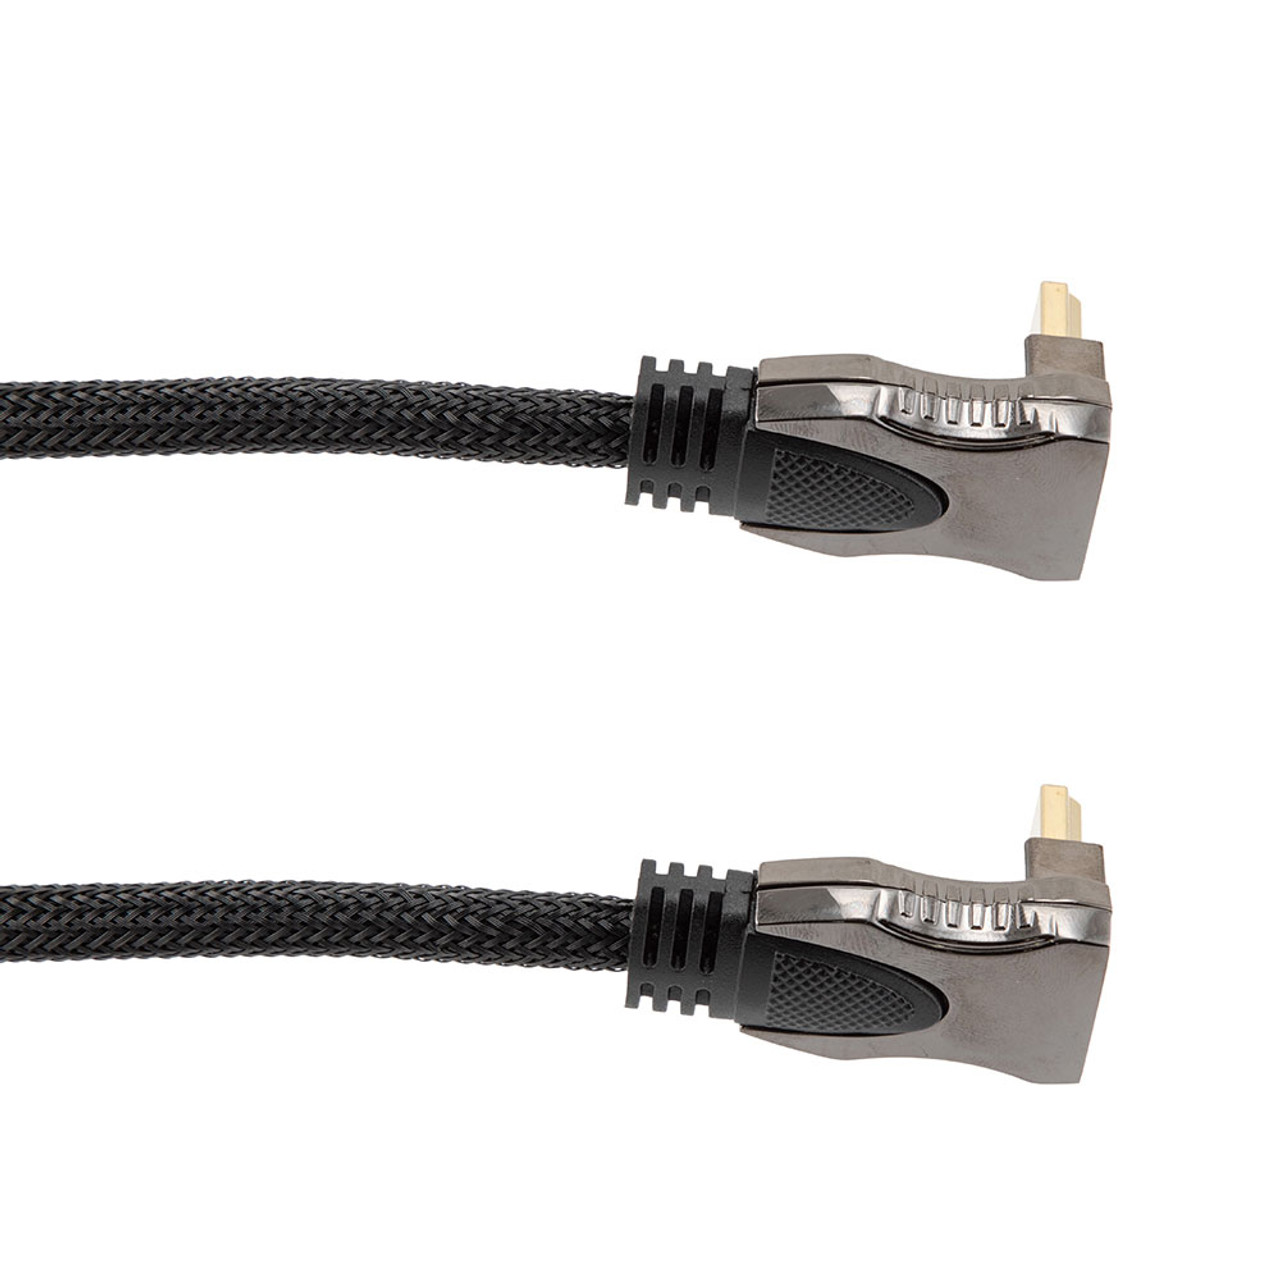 NavePoint HDMI 2.0 Male to Male Braided Cable, PVC with Nylon, Black, Zinc Alloy shell, Supports 4K @ 60Hz, Right Angle Down to Right Angle Down, 3M